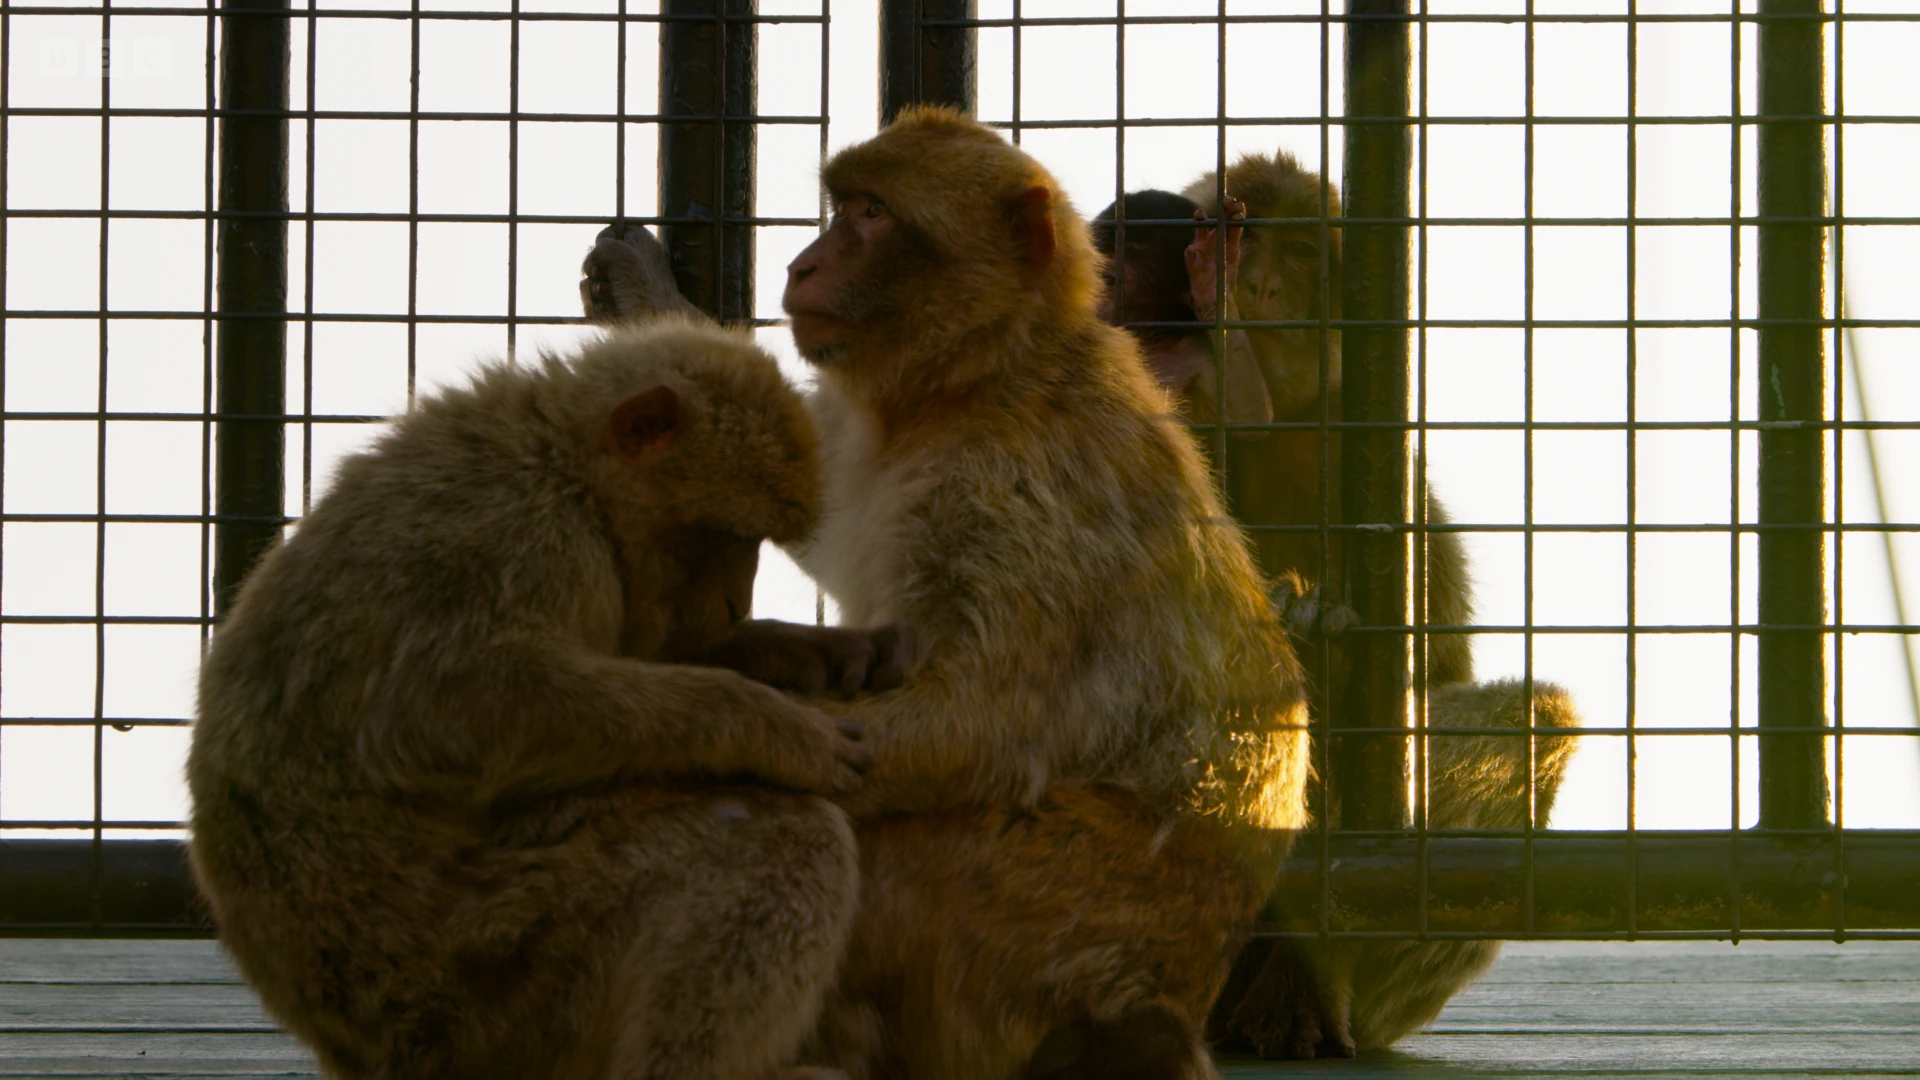 Barbary macaque (Macaca sylvanus) as shown in Seven Worlds, One Planet - Europe